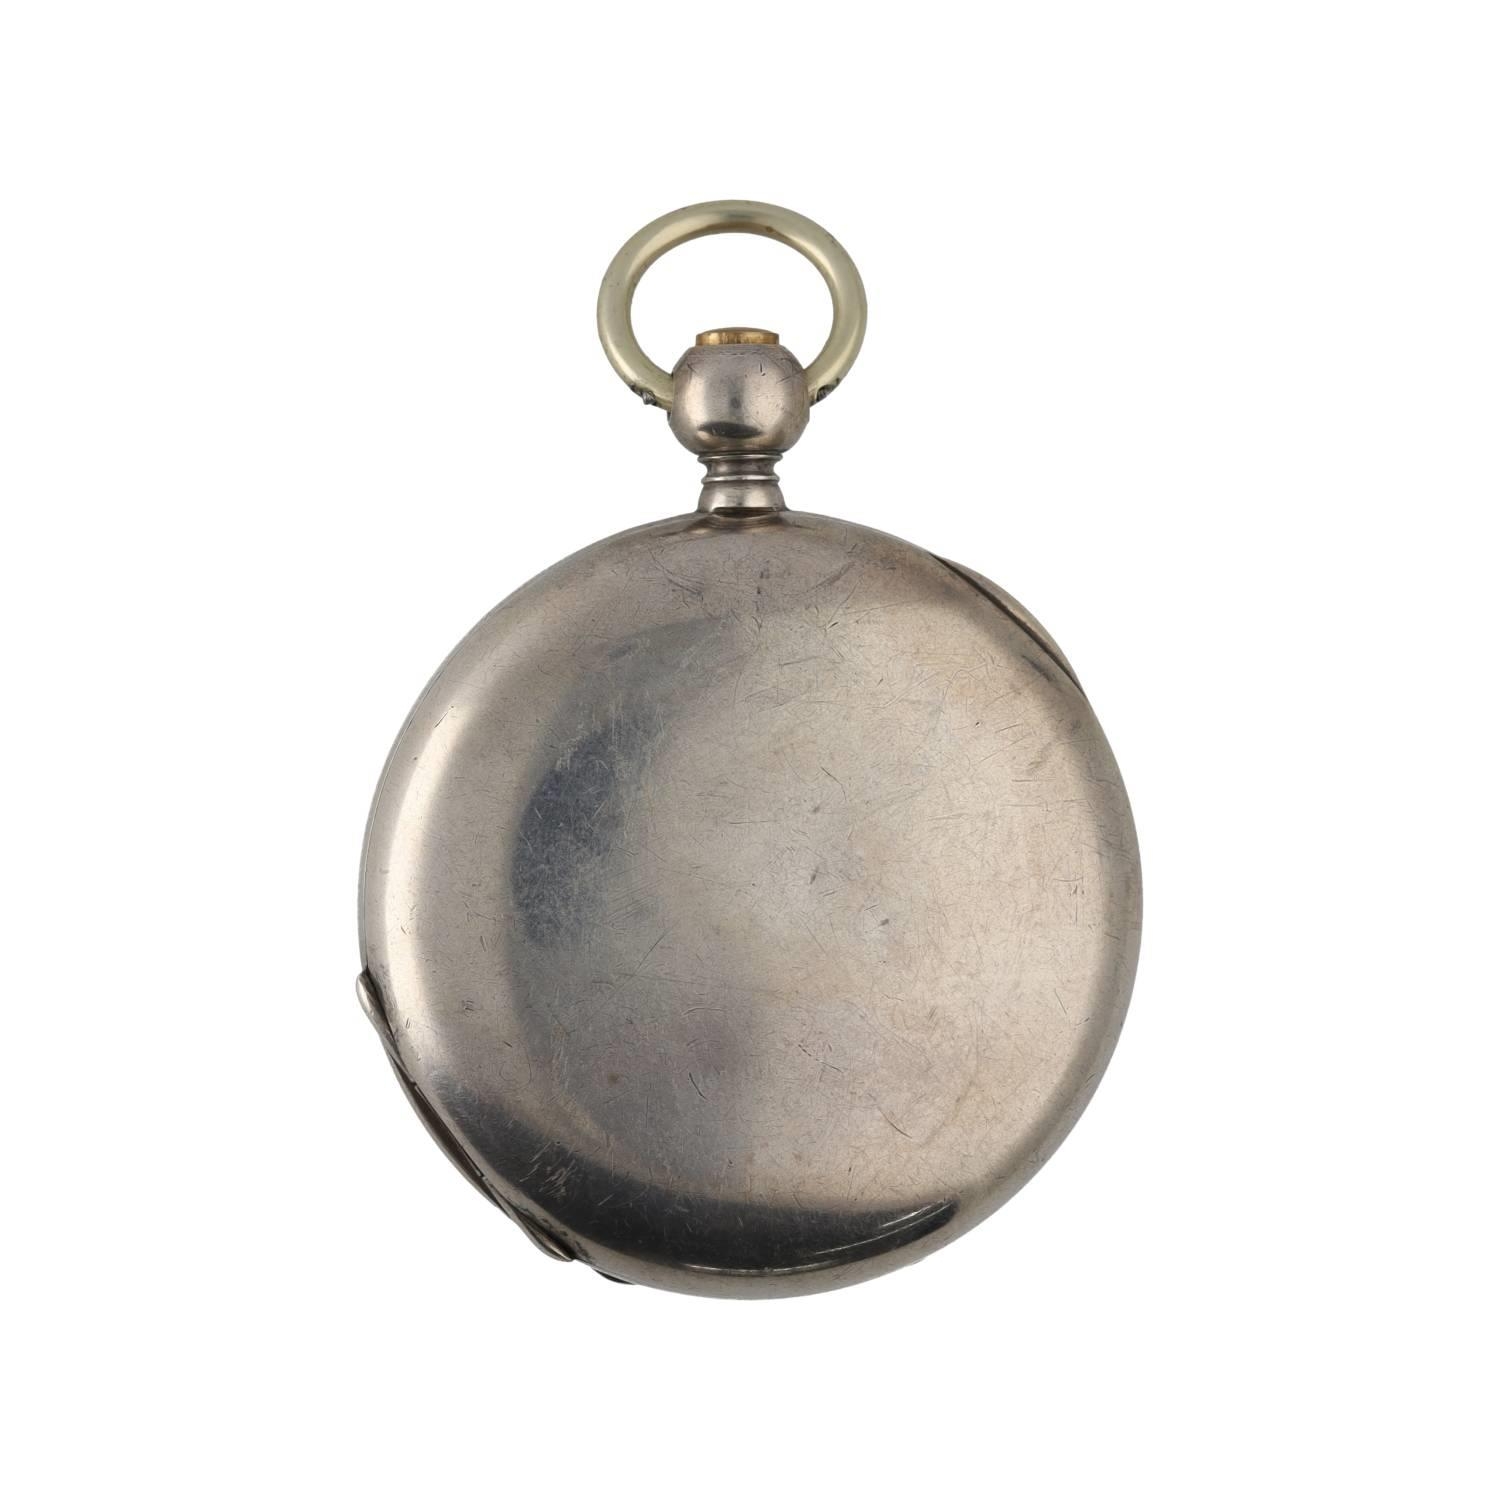 Early American Waltham 'P.S. Bartlett' lever hunter pocket watch, circa 1864, serial no. 148734, - Image 5 of 5